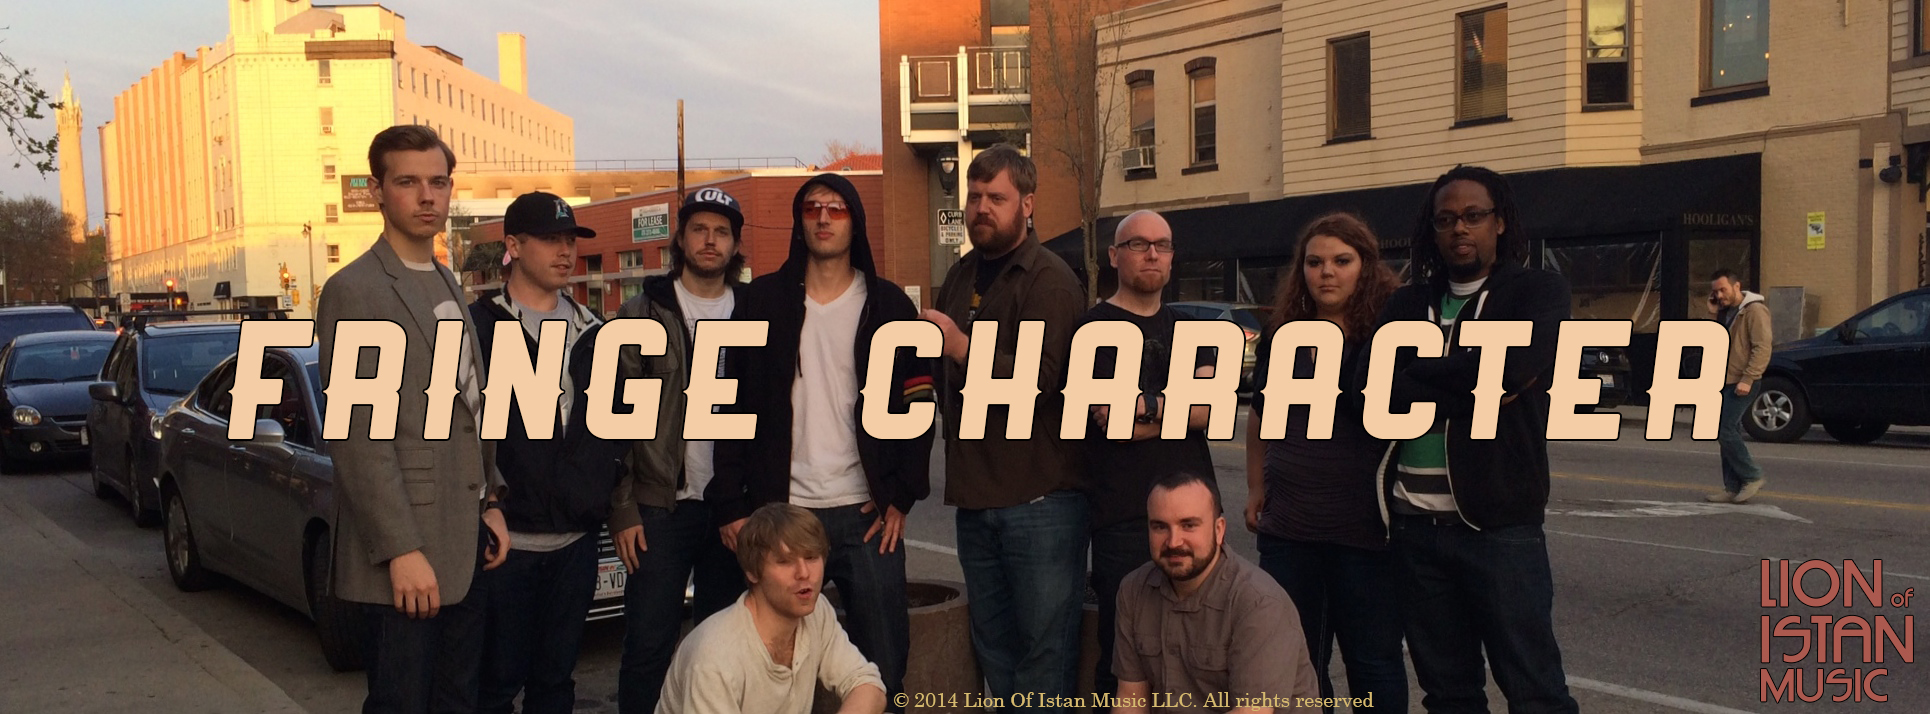 FRINGE CHARACTER - Thu., July 24, 2014 - The Majestic Theatre